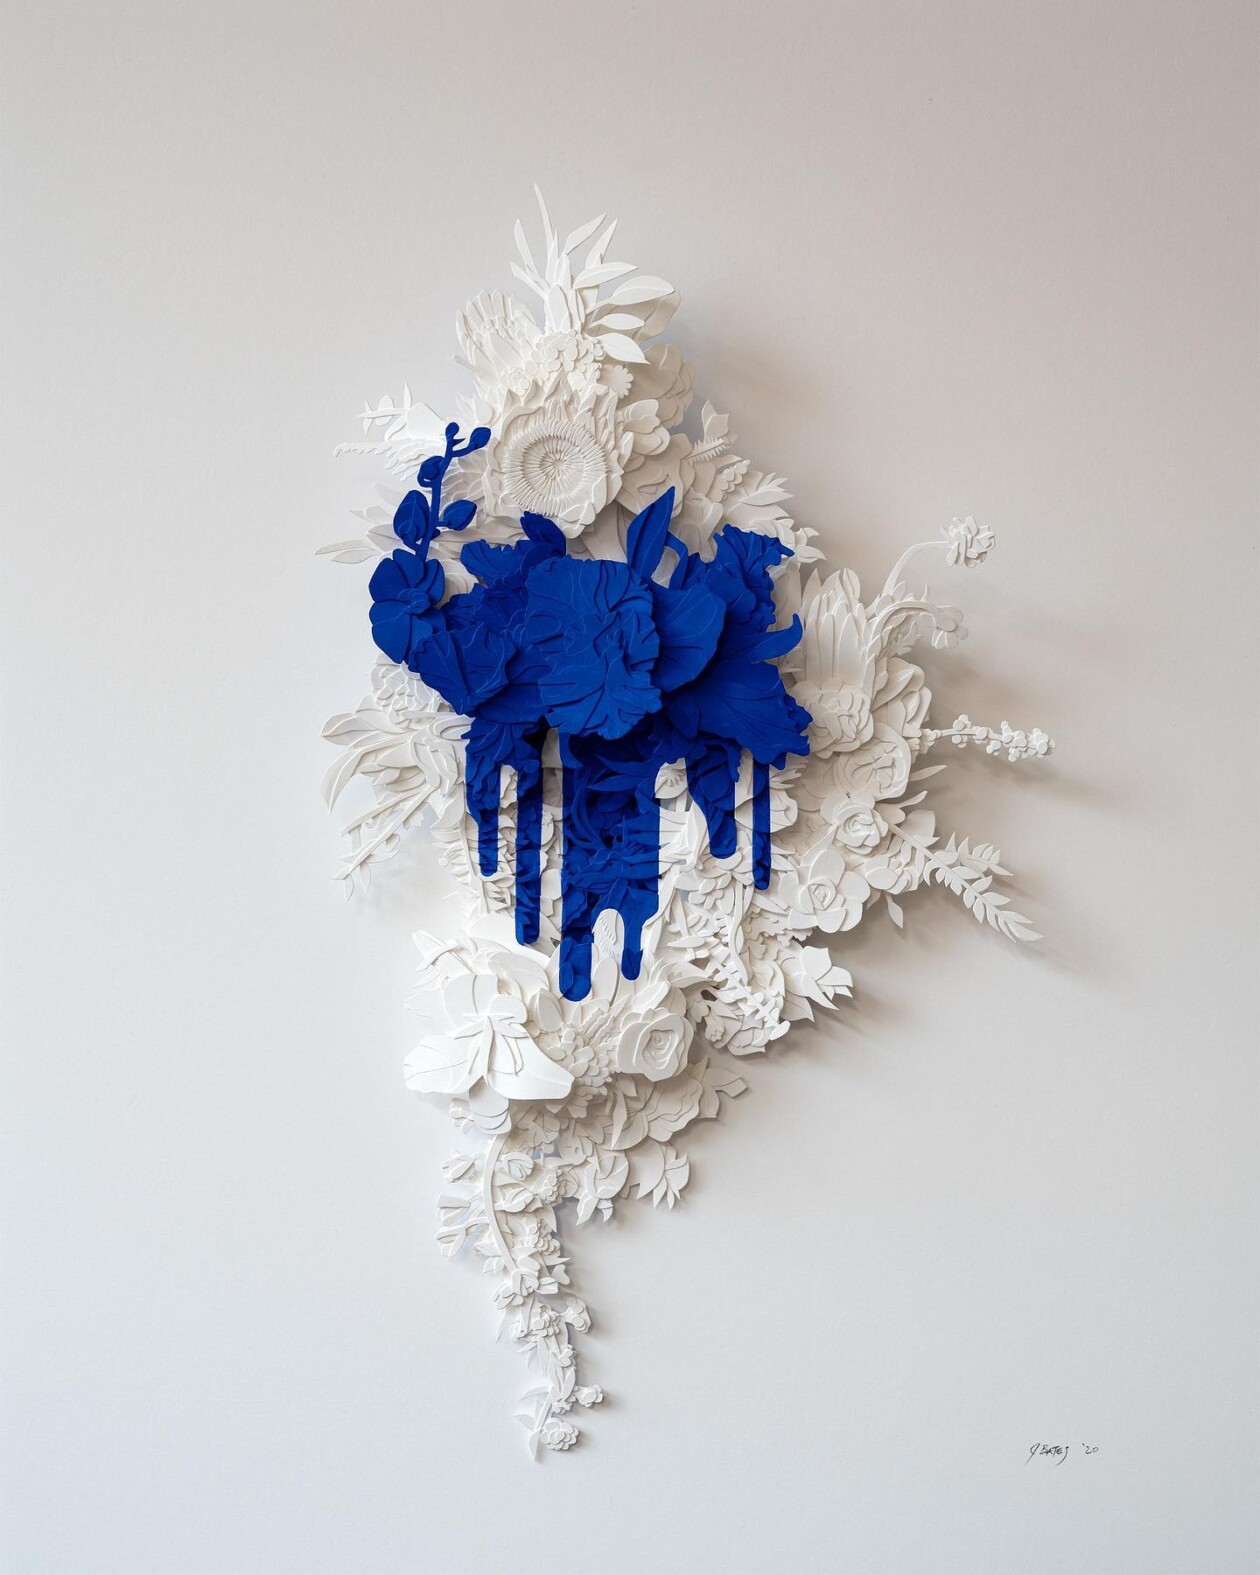 Gorgeously Intricate Floral Paper Cutting Sculptures By Joey Bates (1)